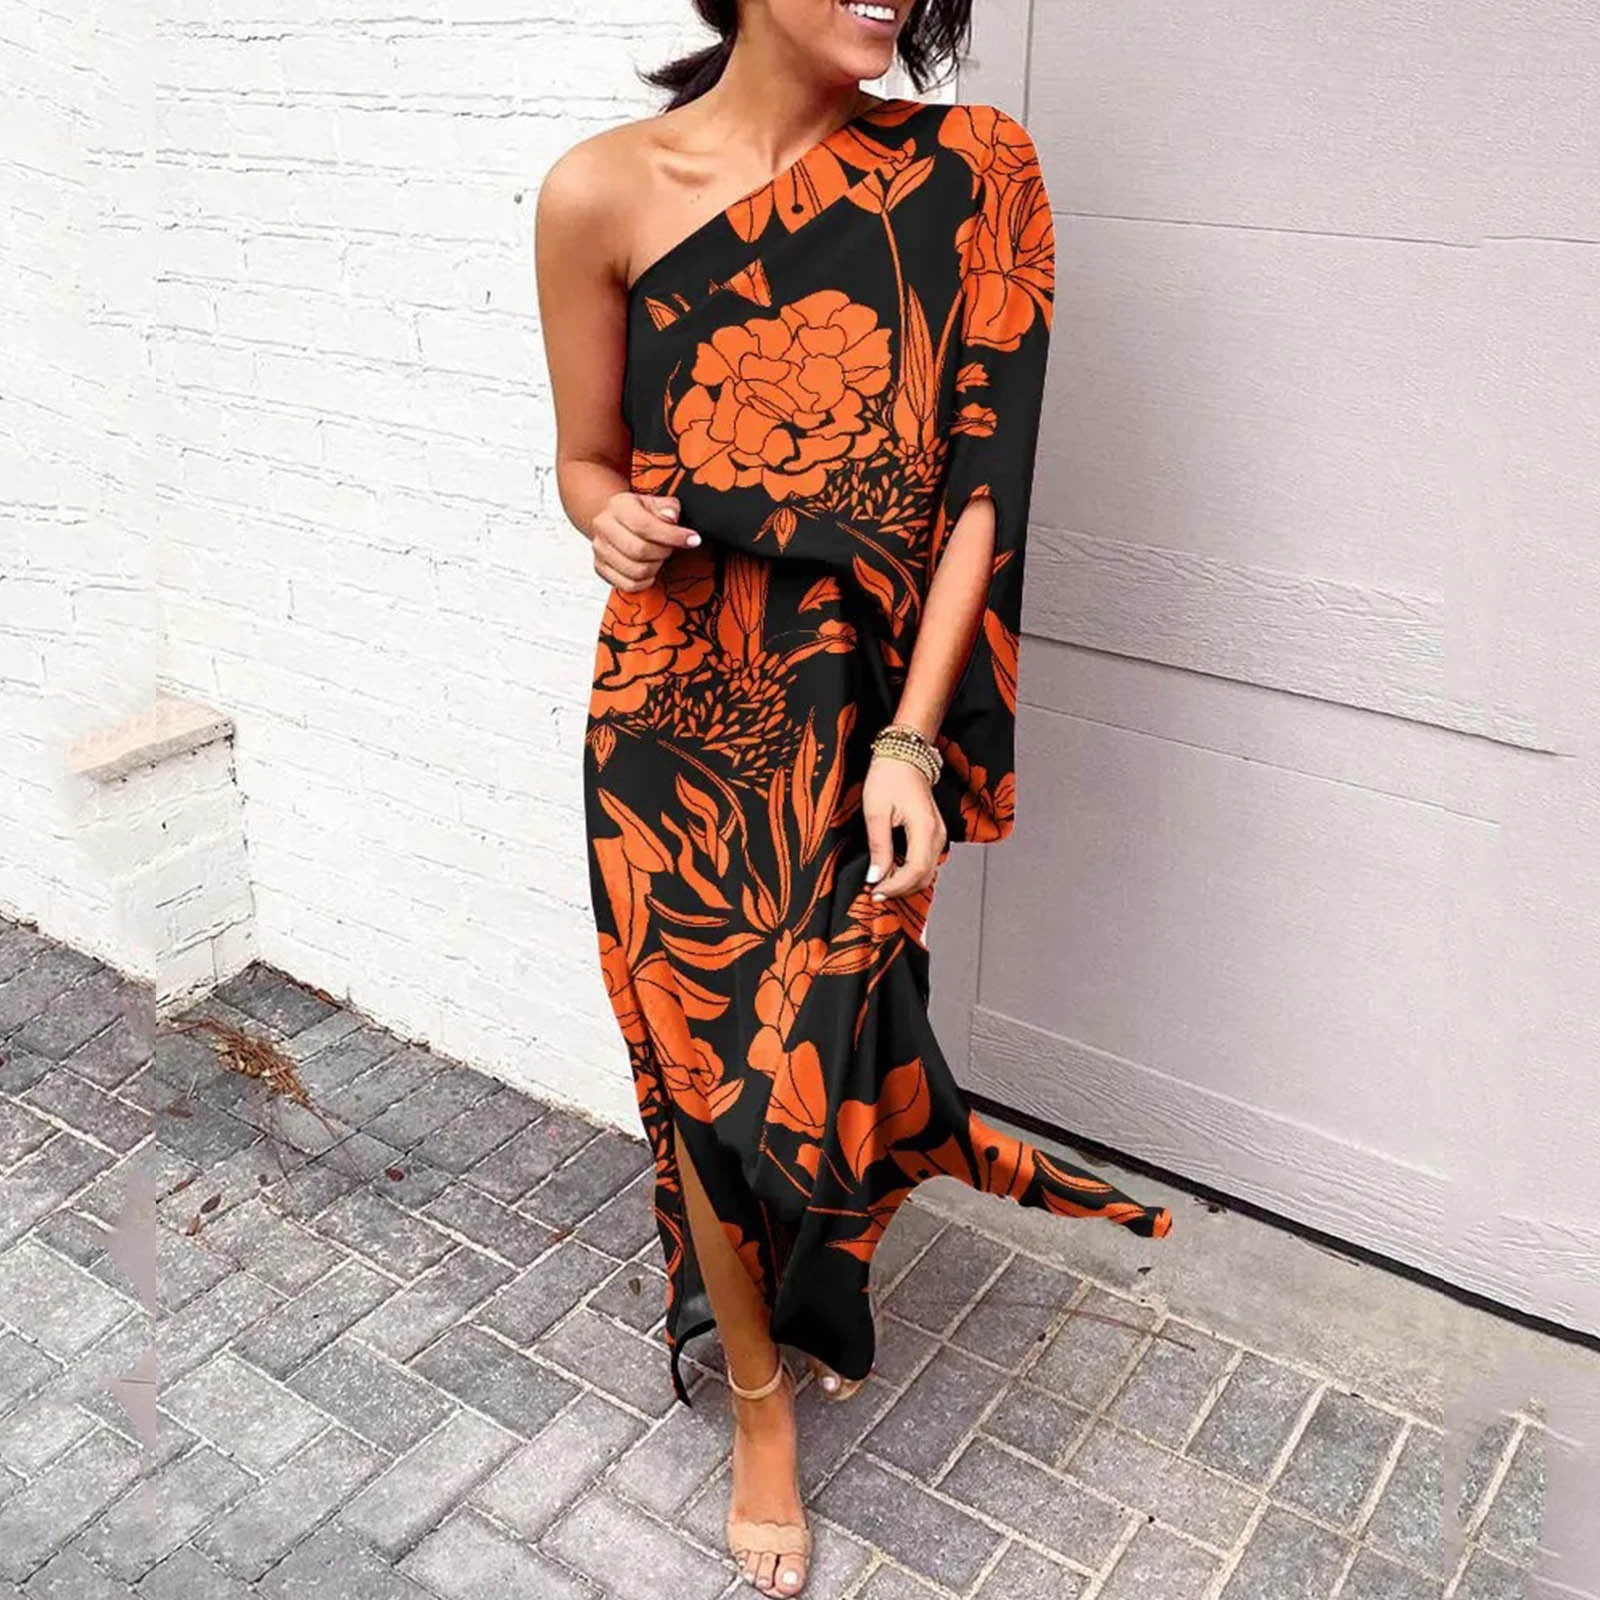 Women's Fashion Womens Floral Print One Shoulder Ruched Short Dress  Butterfly Sleeve Asymmetrical Hem Wrap Front Party Dresses winter clothes  for women - Walmart.com